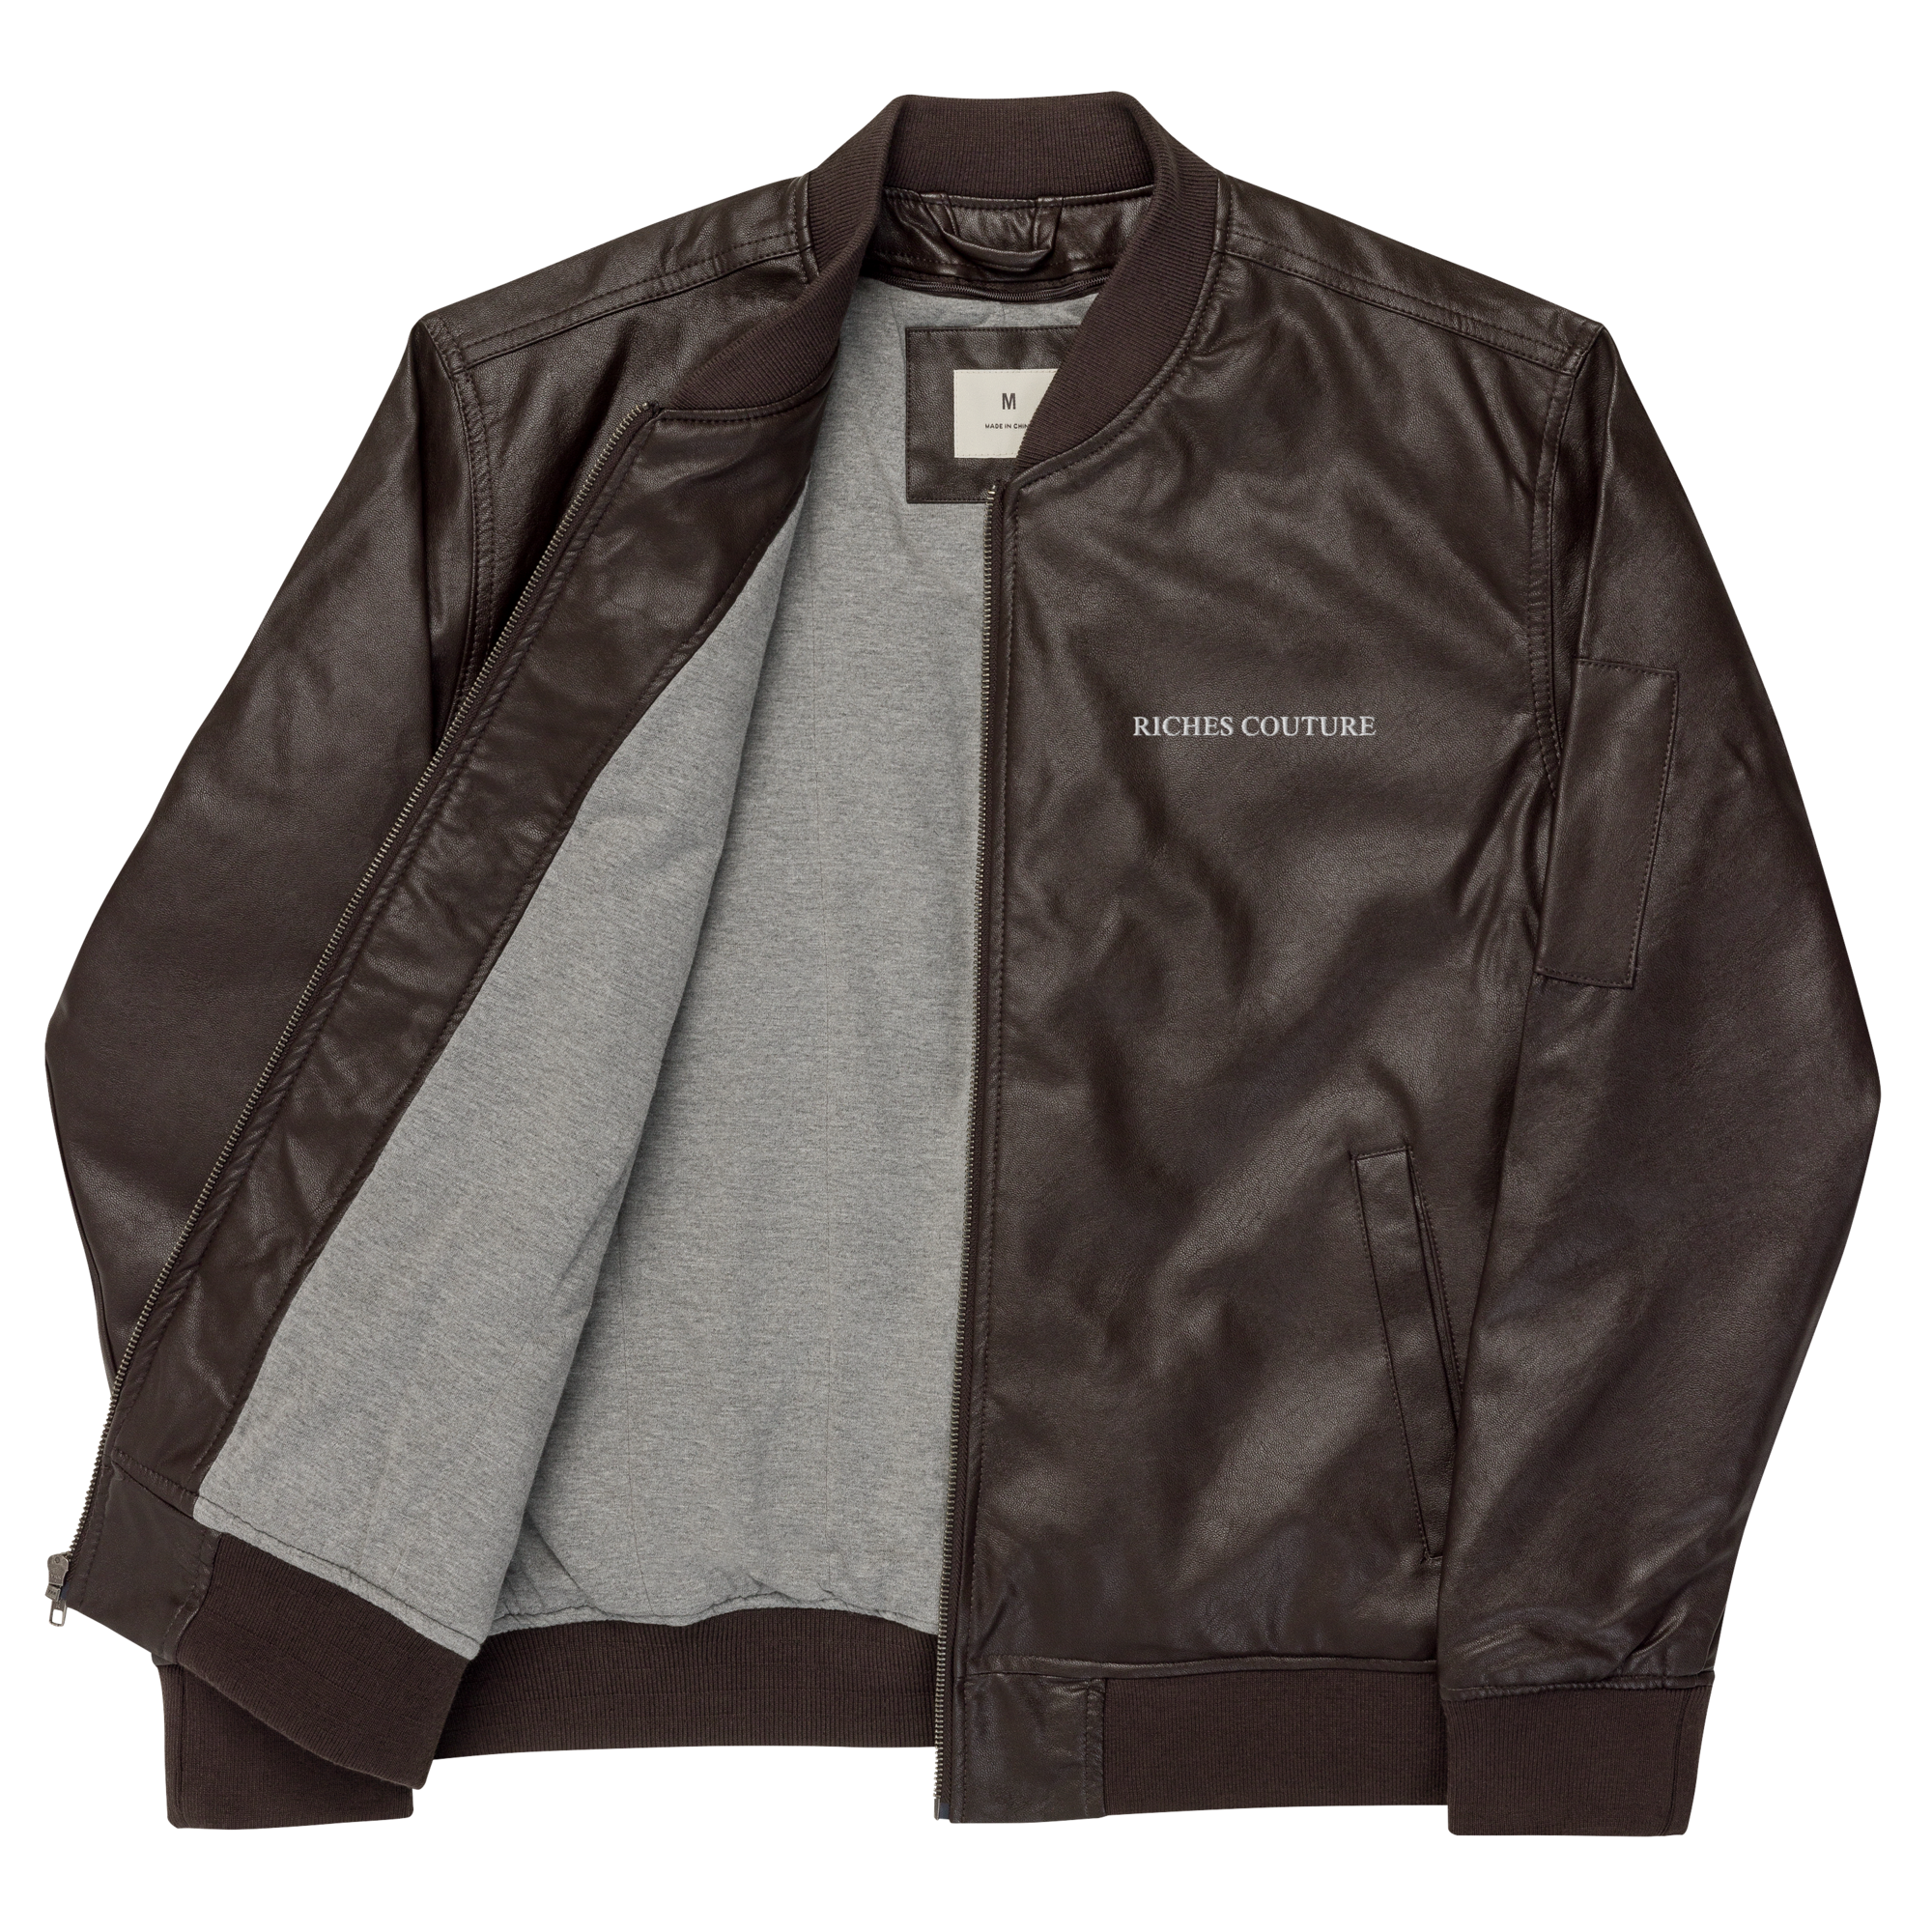 Riches Couture Brown Leather Bomber Jacket